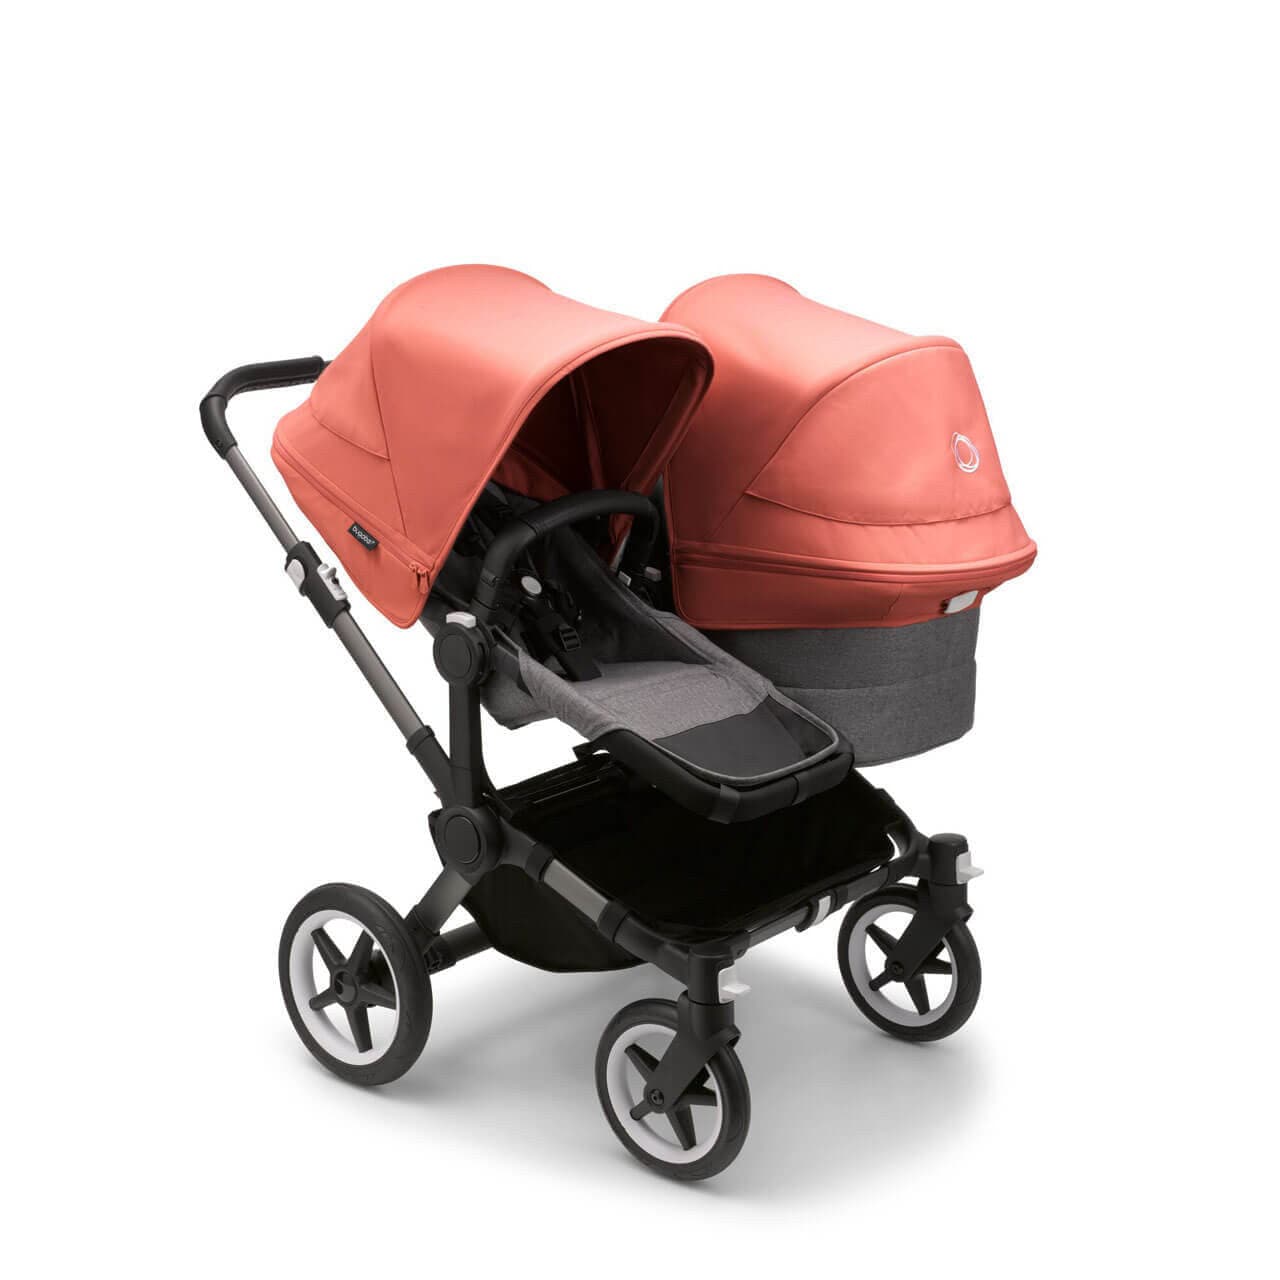 Bugaboo Donkey 5 Duo Pushchair on Graphite/Grey Chassis - Choose Your Colour - Sunrise Red | For Your Little One